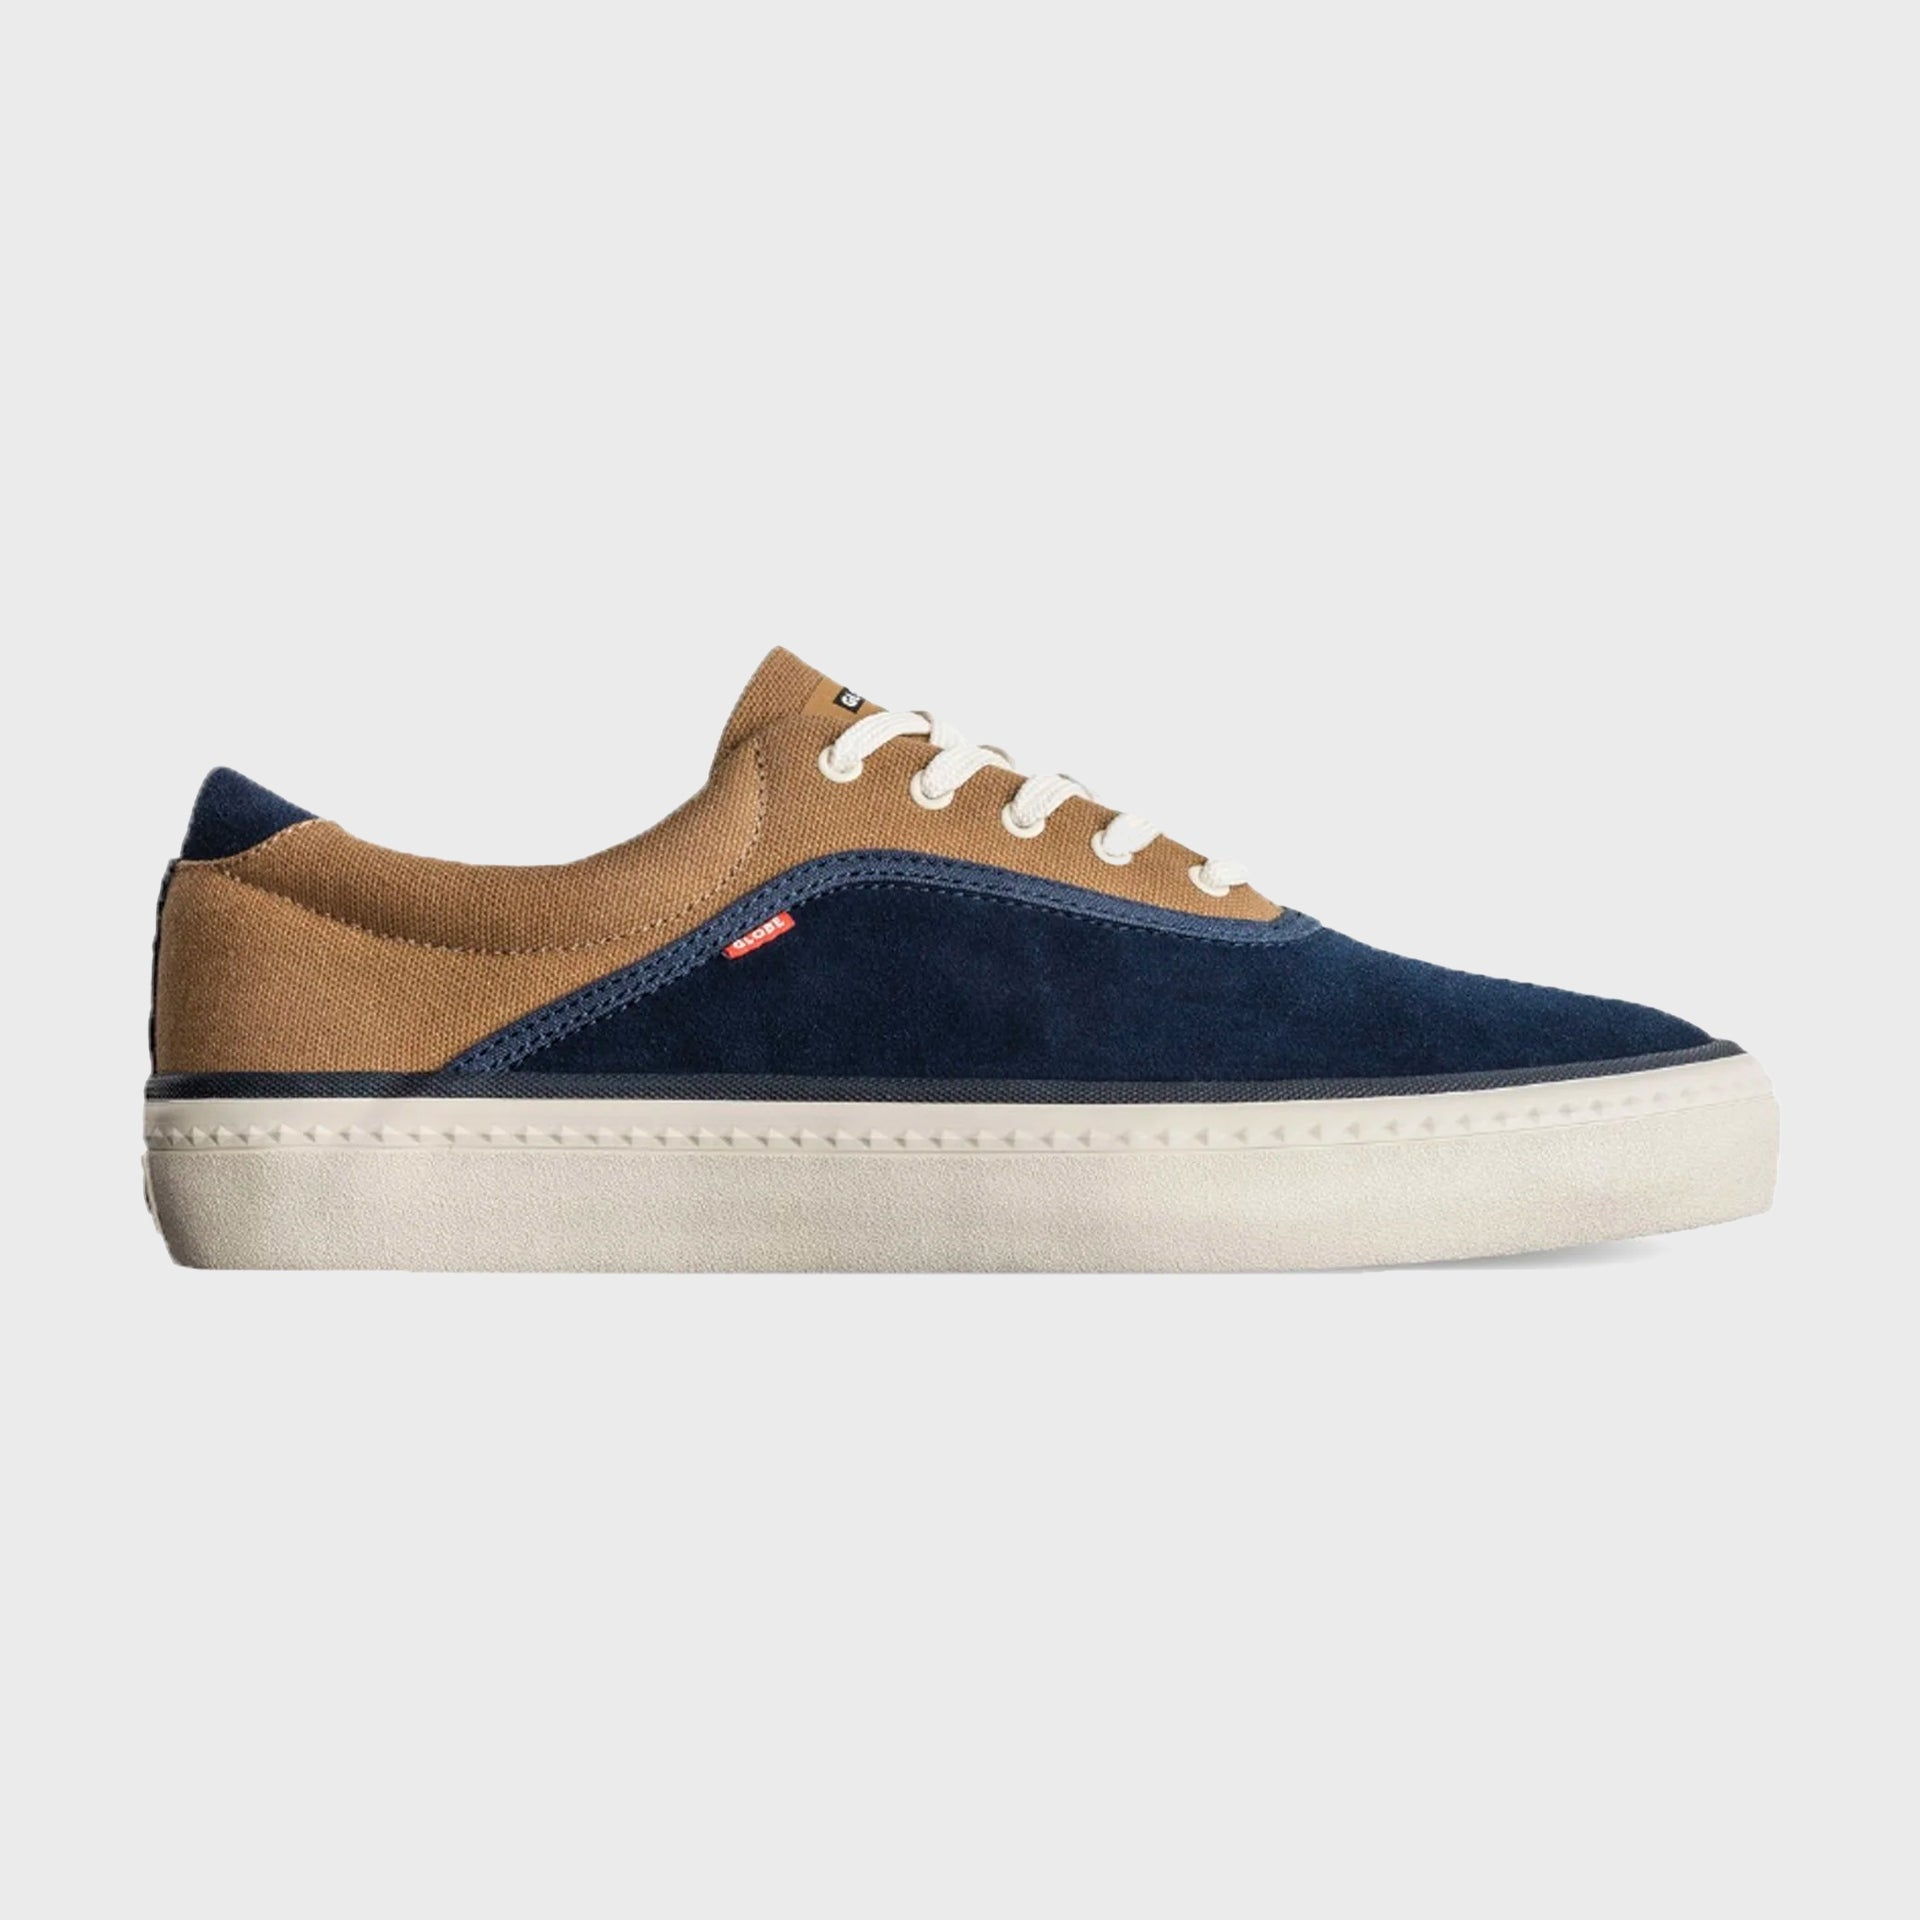 Globe Sprout Mens Shoes - Navy/Brown/Antique - ManGo Surfing